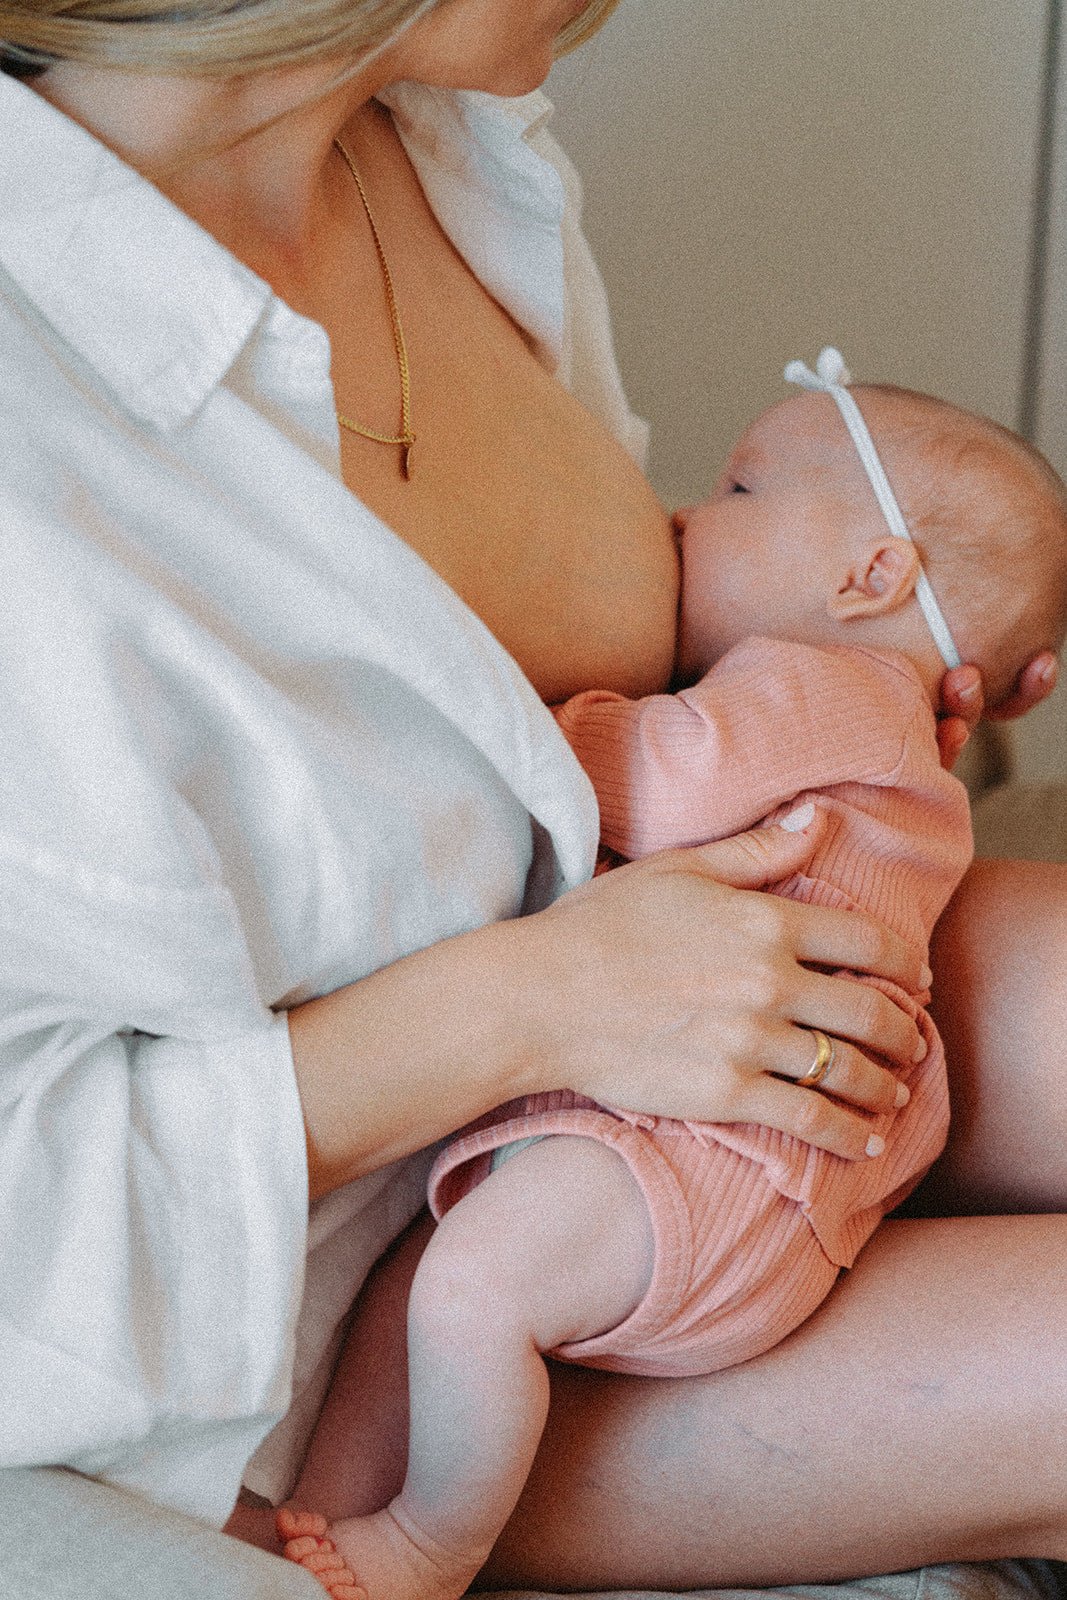 7 Items to Add to Your Postpartum Recovery Kit